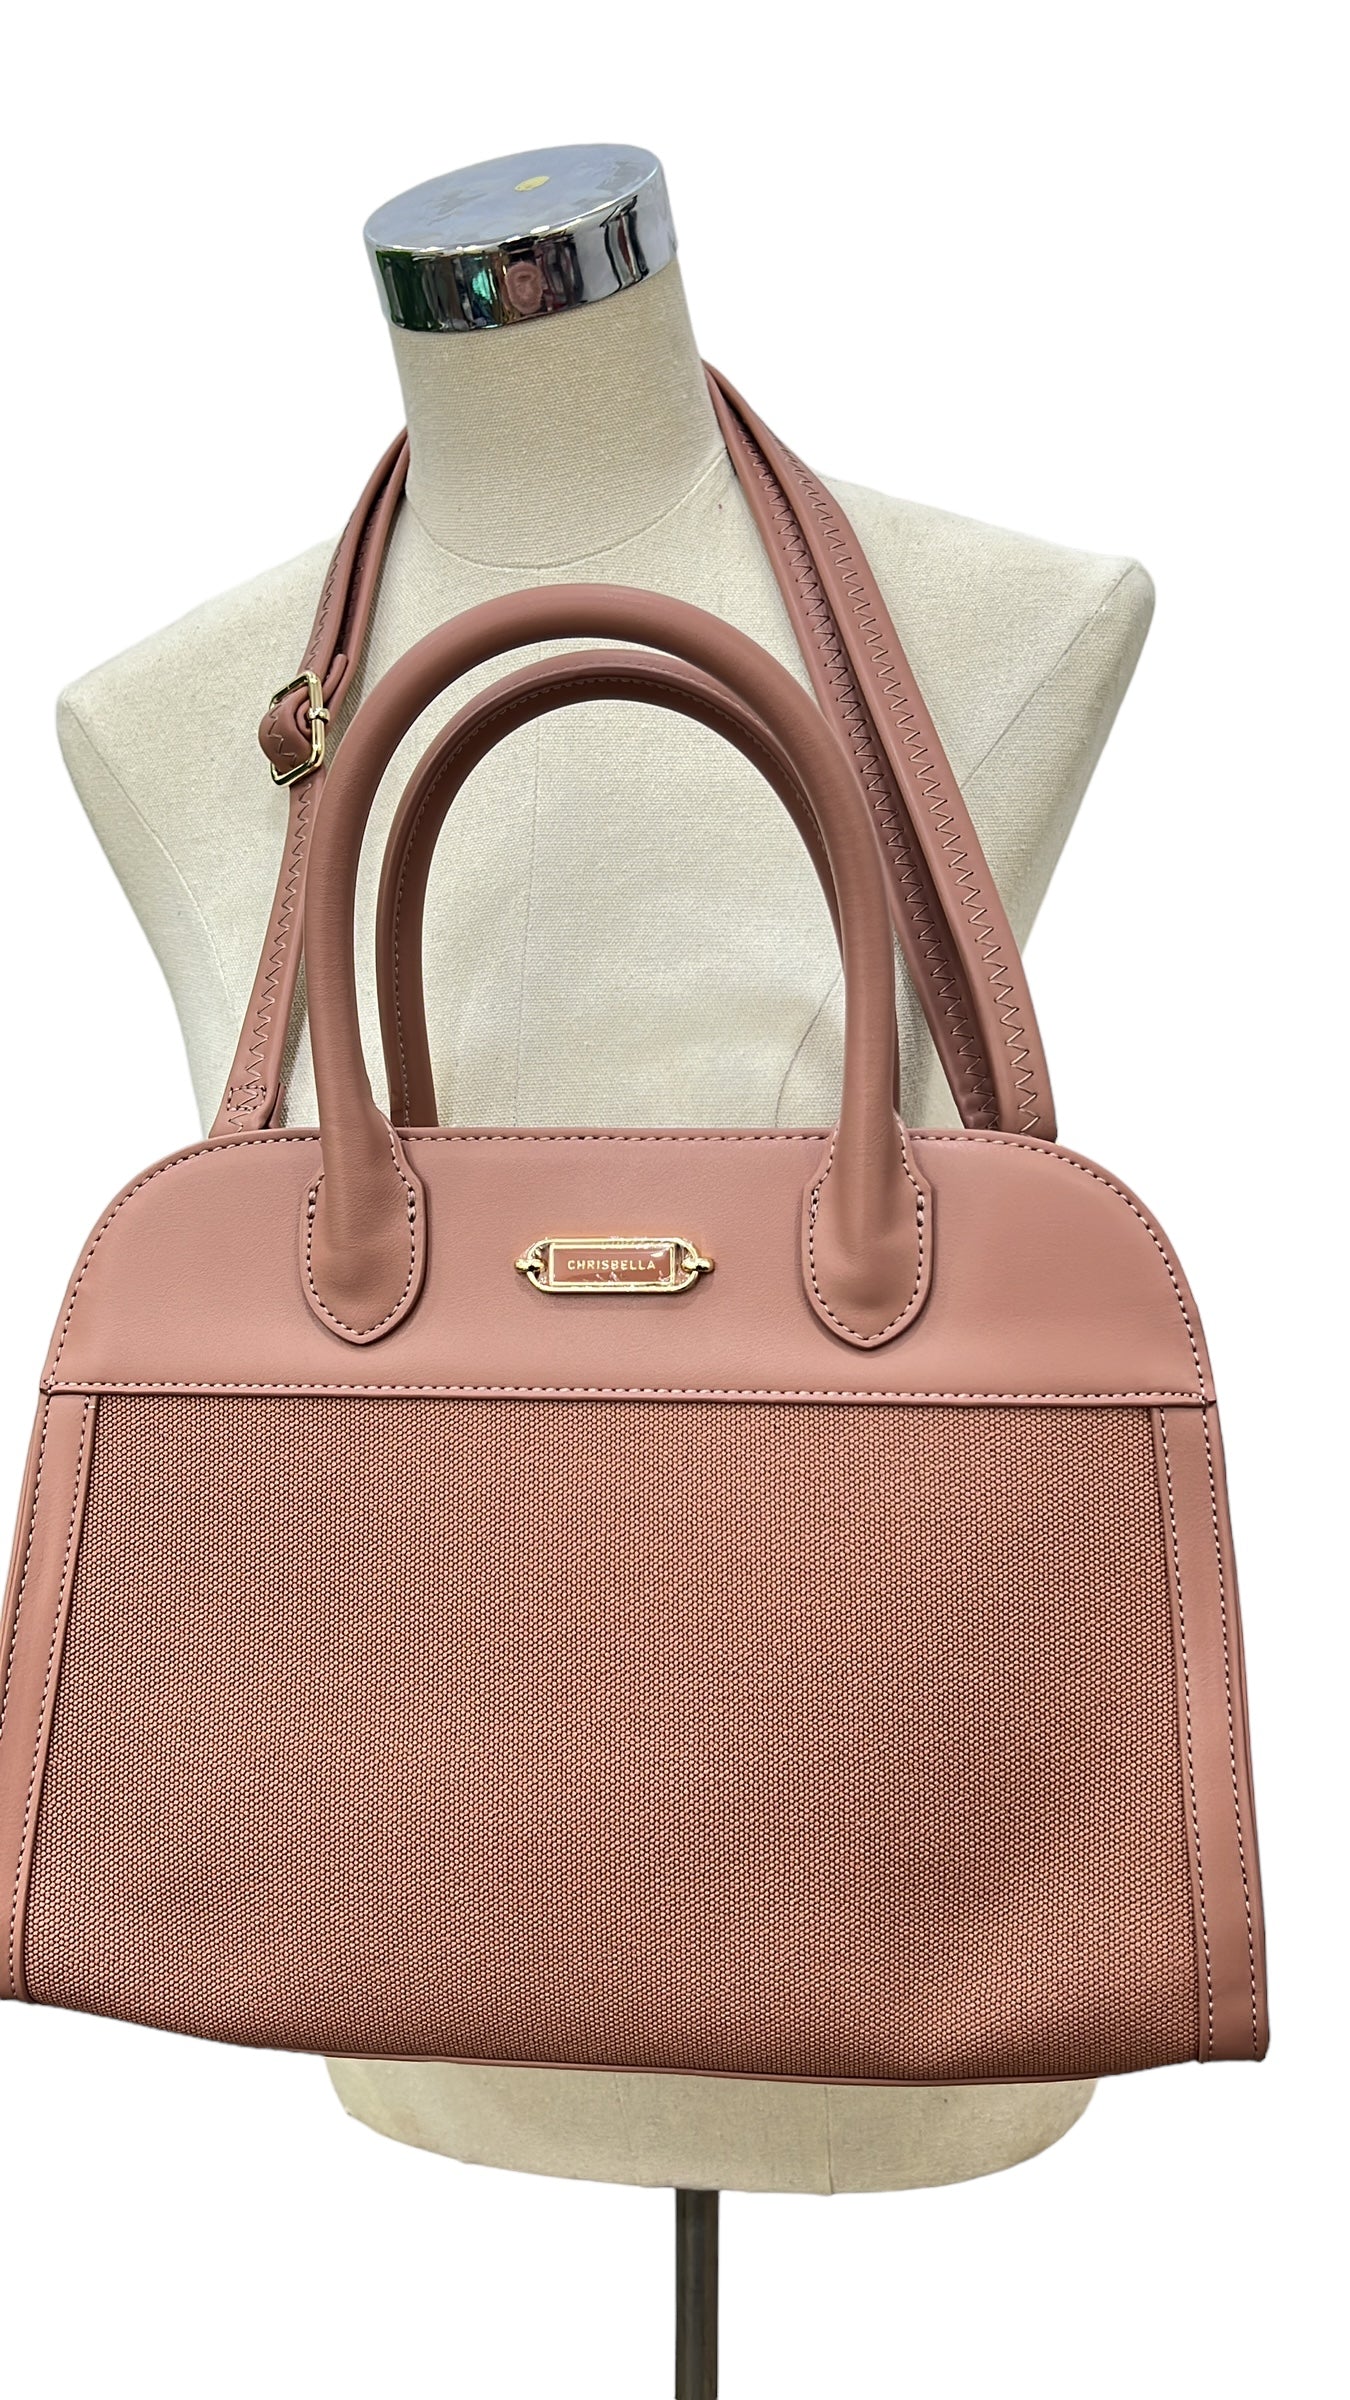 CHRISBELLA MIDI TWO-TEXTURE BAG IN PINK